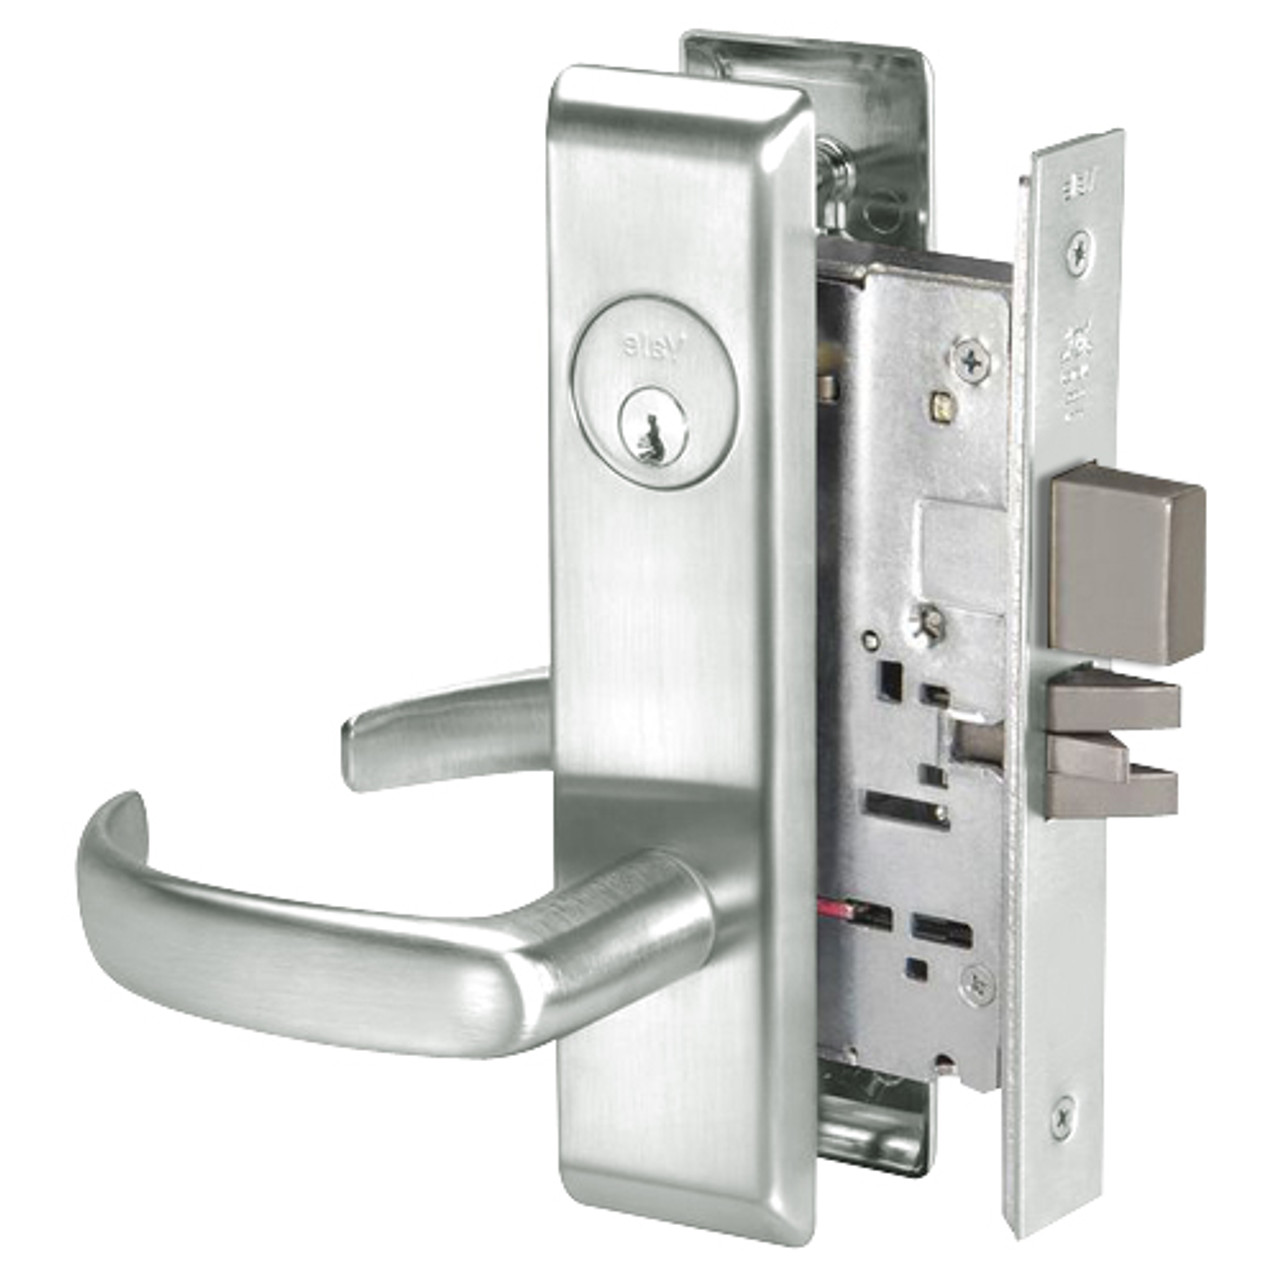 PBCN8822FL-618 Yale 8800FL Series Single Cylinder with Deadbolt Mortise Bathroom Lock with Indicator with Pacific Beach Lever in Bright Nickel